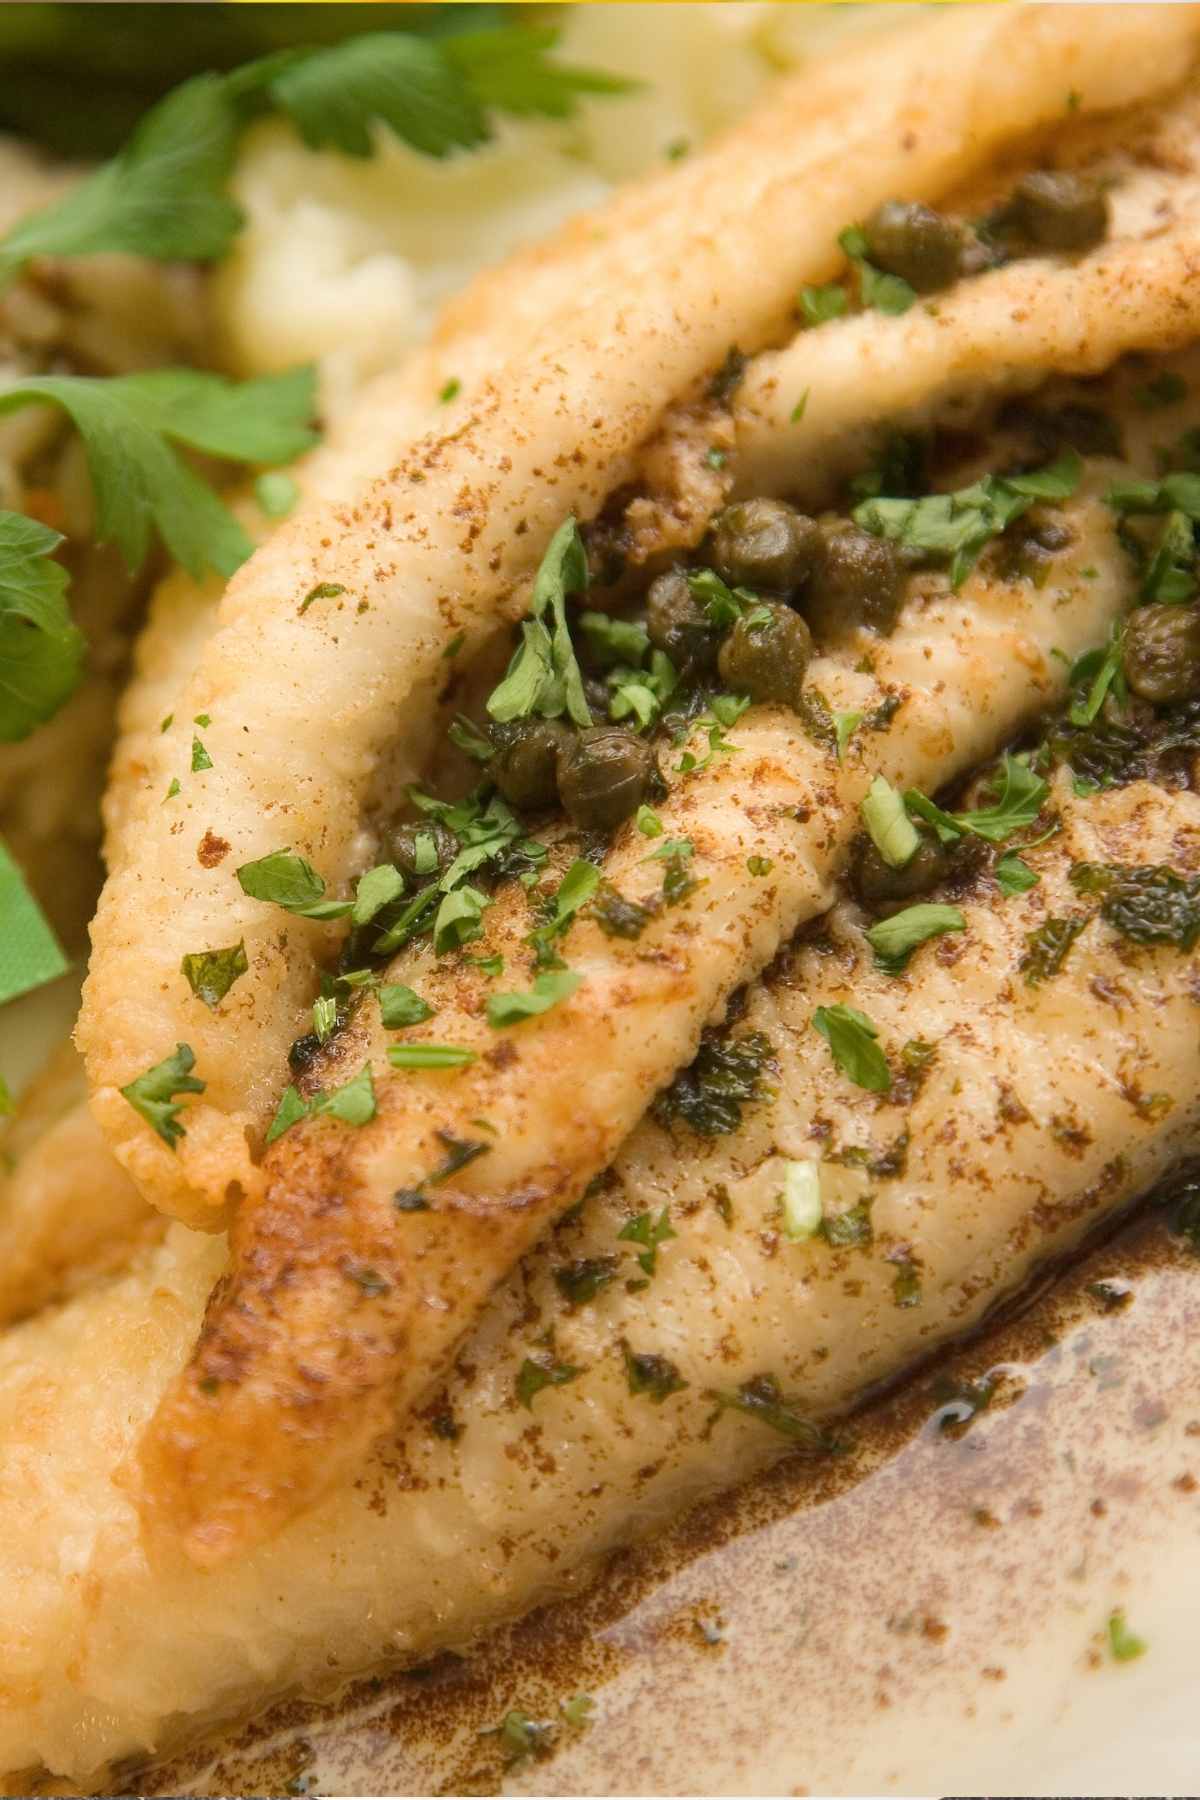 Mildly flavored Dover sole is a popular white fish that’s often served in restaurants. It has a meaty texture and pairs well with the flavors of lemon and garlic. If you love white fish, give Dover sole a try. It’s quite easy to make and can be prepared in a number of ways.